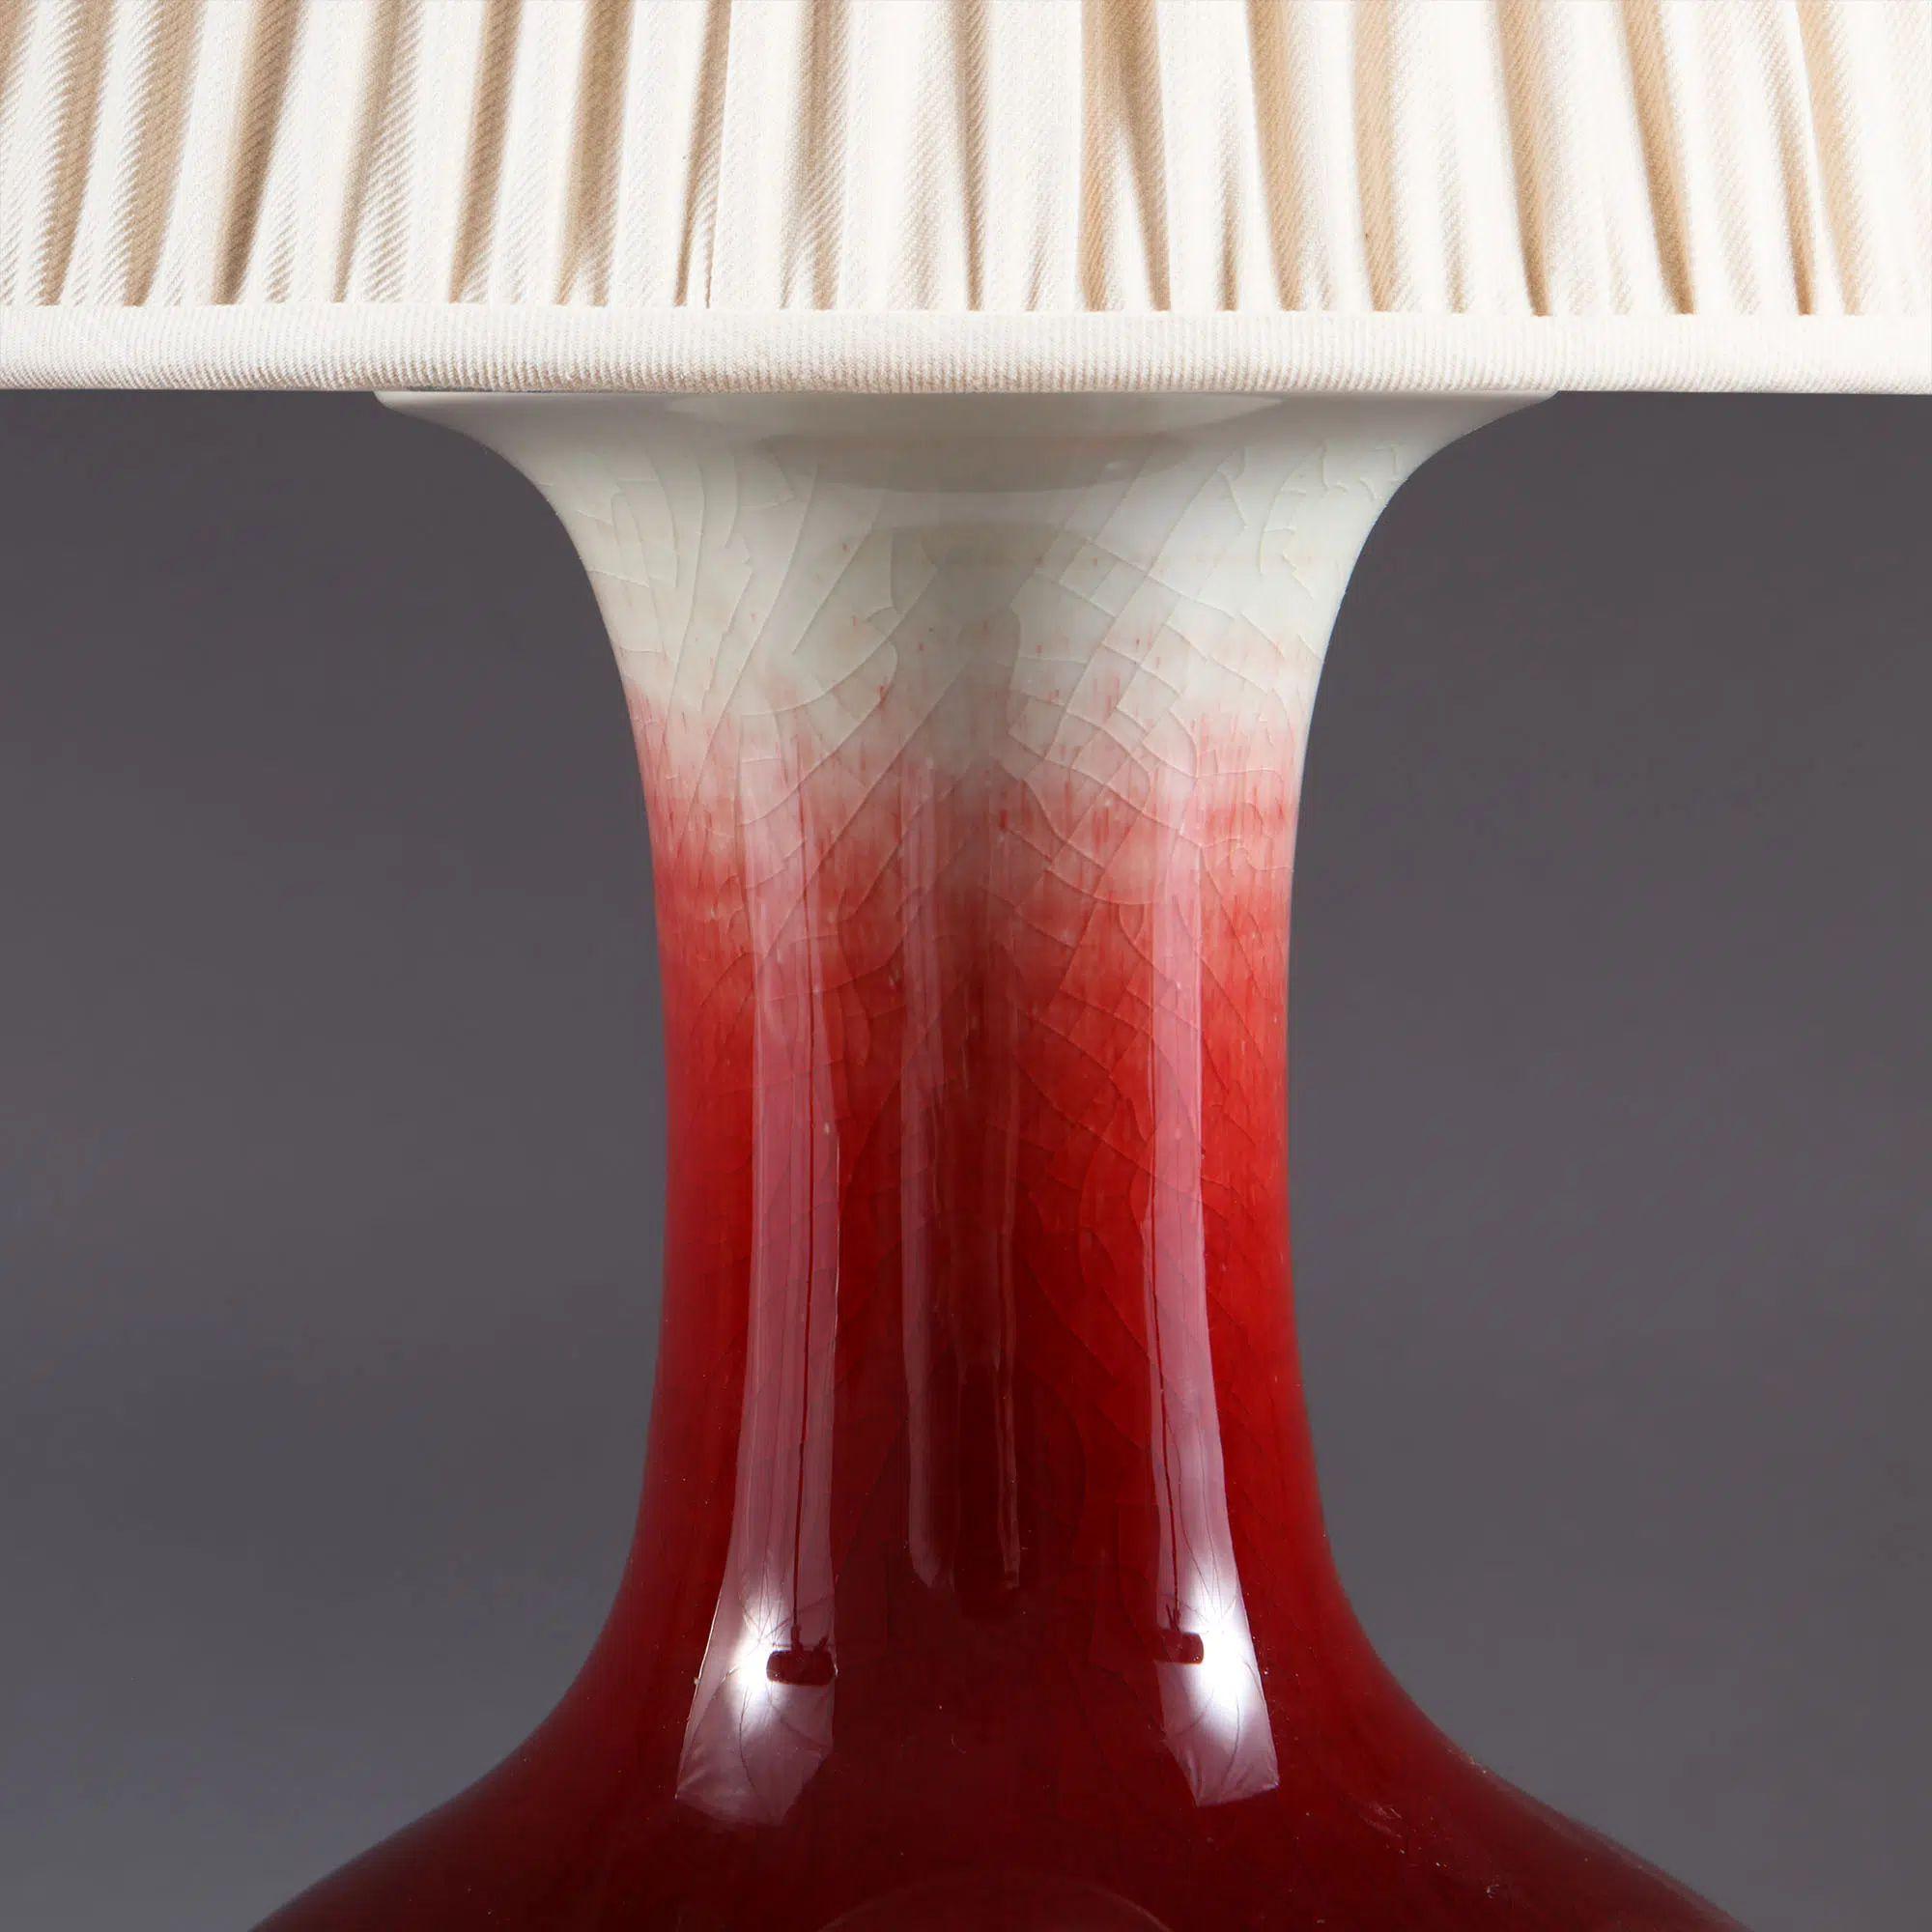 Chinese Sang de Boeuf Vase mounted as a table lamp.

An attractive Chinese sang de boeuf vase with a flared rim, the neck gradually transforming from clear glaze to rich blood red, the base with flicks of blue and purple. Now mounted as a table